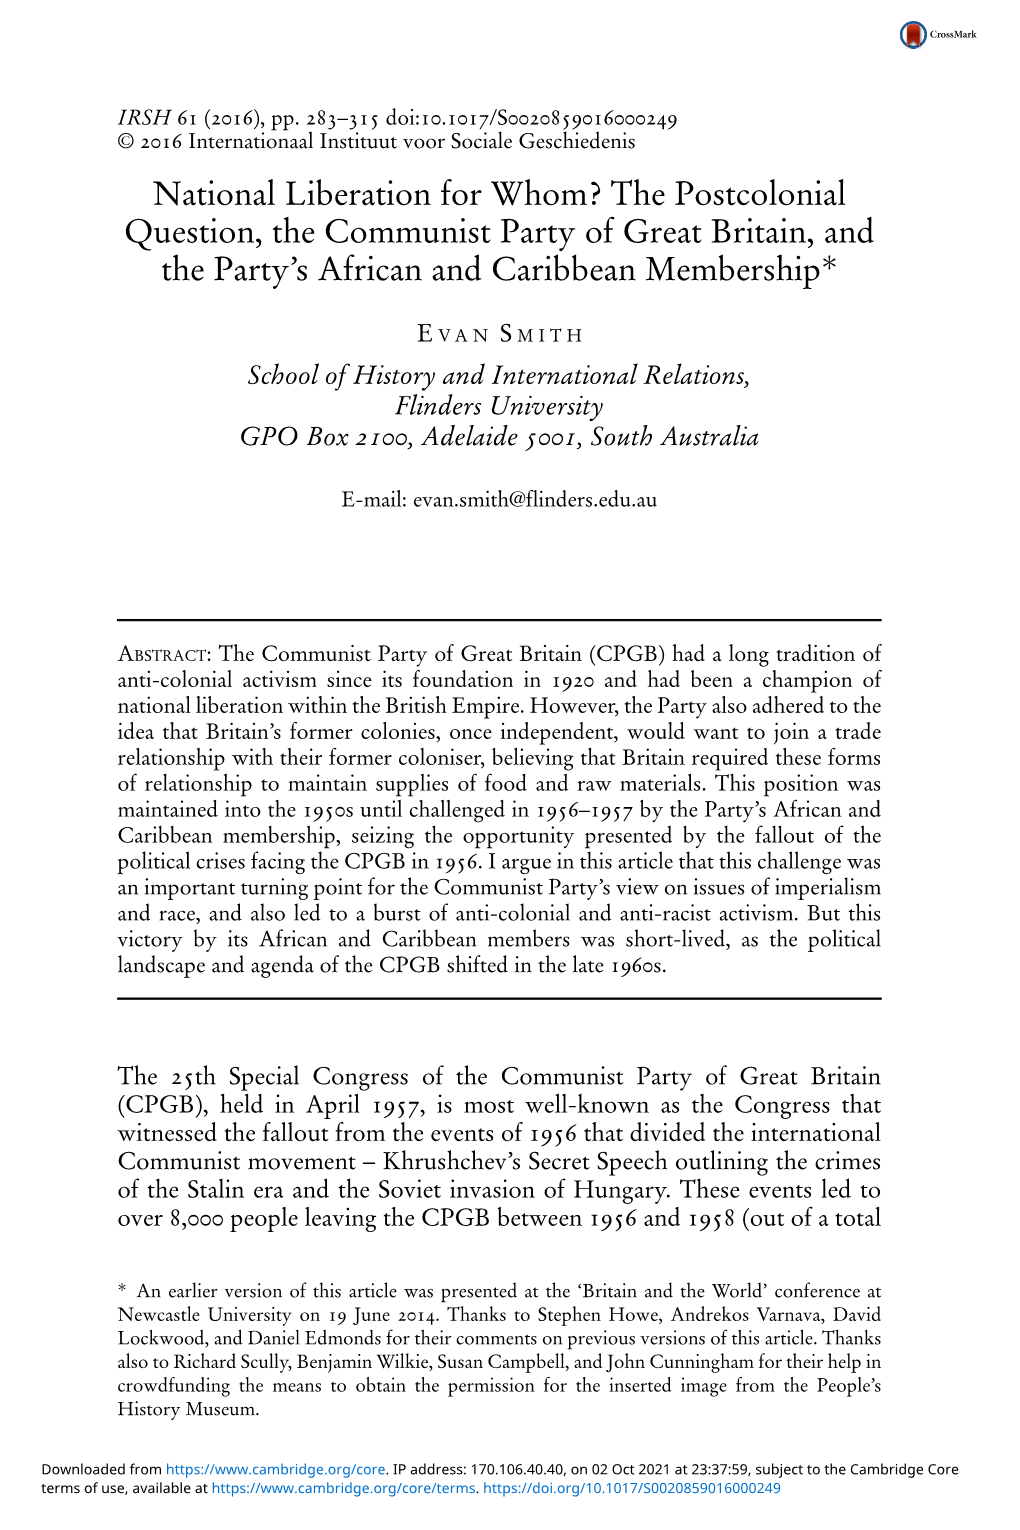 National Liberation for Whom? the Postcolonial Question, the Communist Party of Great Britain, and the Party’S African and Caribbean Membership*